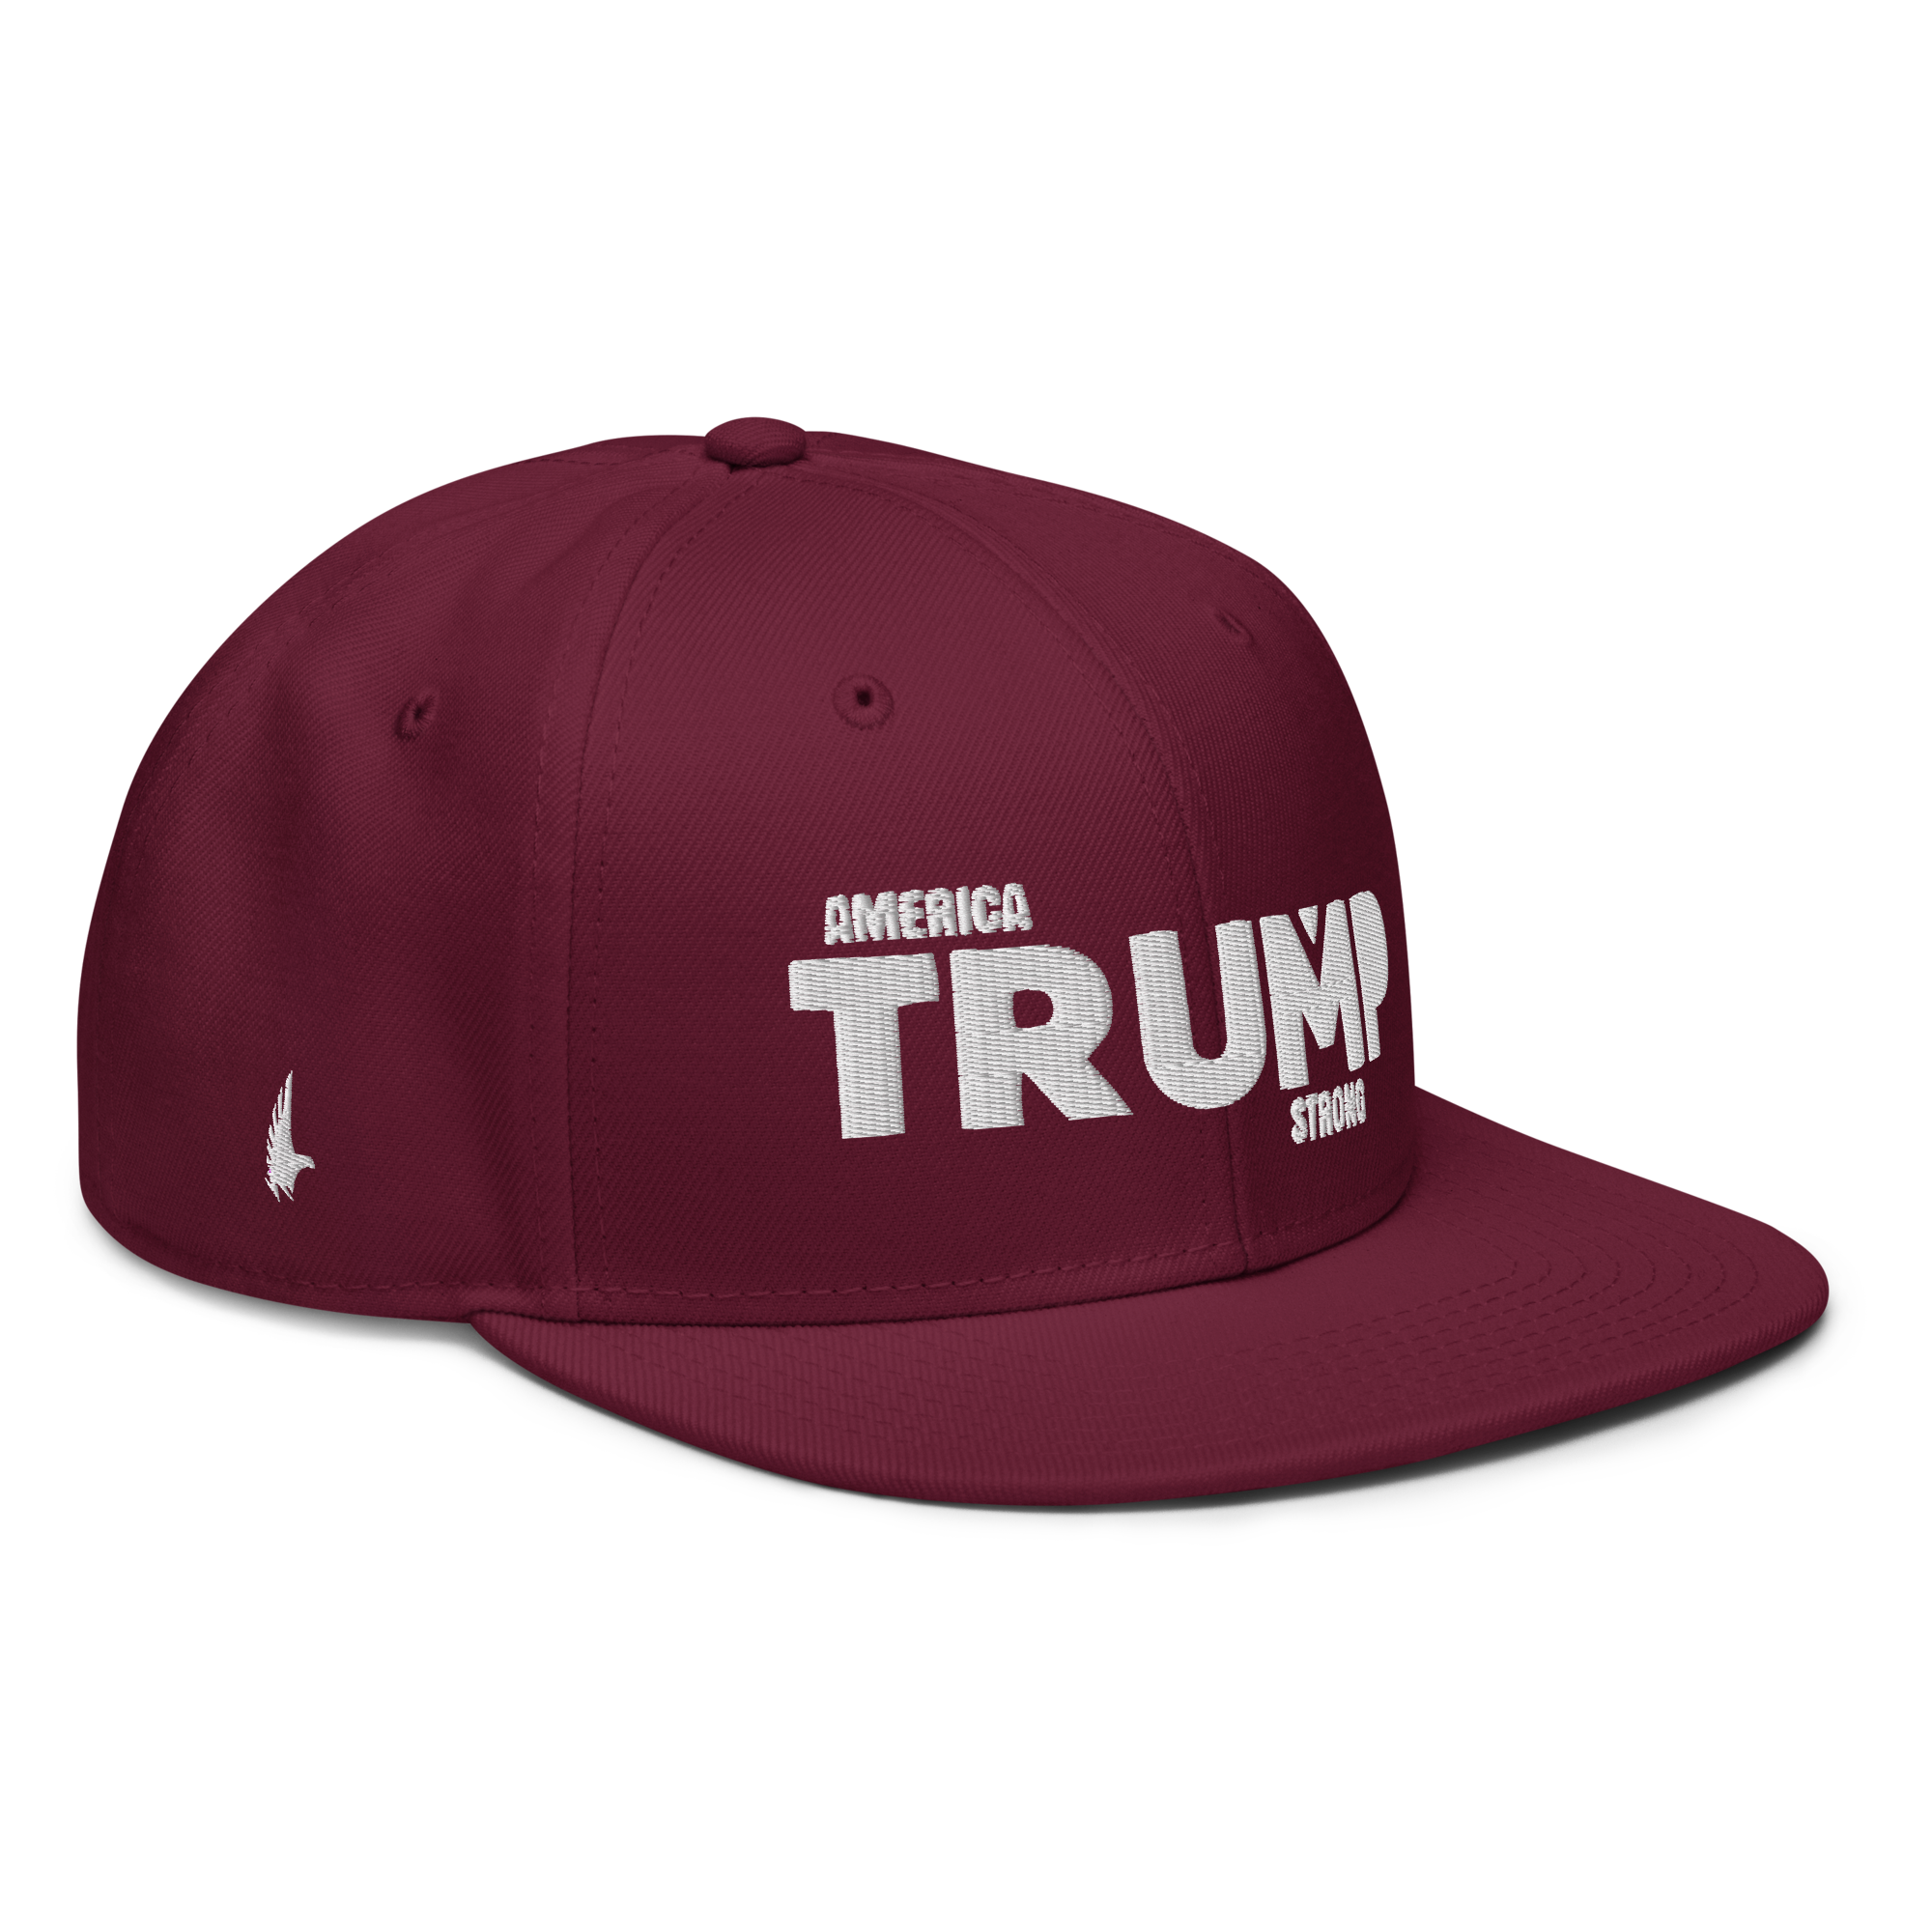 Loyalty Vibes America Trump Strong Snapback Hat Maroon One size - Loyalty Vibes